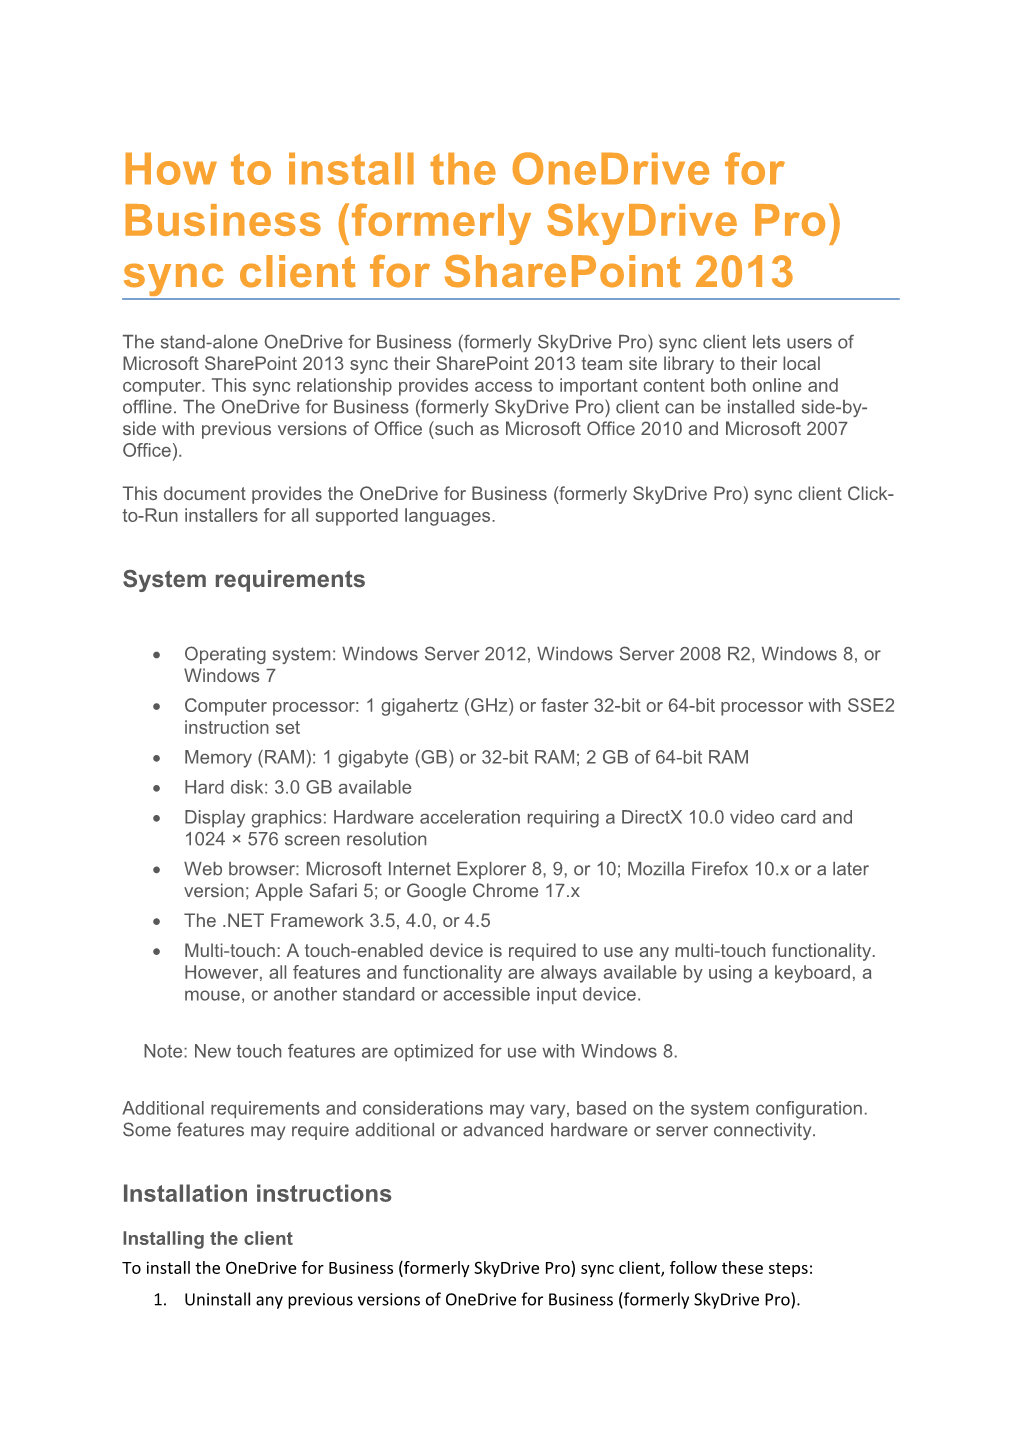 How to Install the Onedrive for Business (Formerly Skydrive Pro) Sync Client for Sharepoint